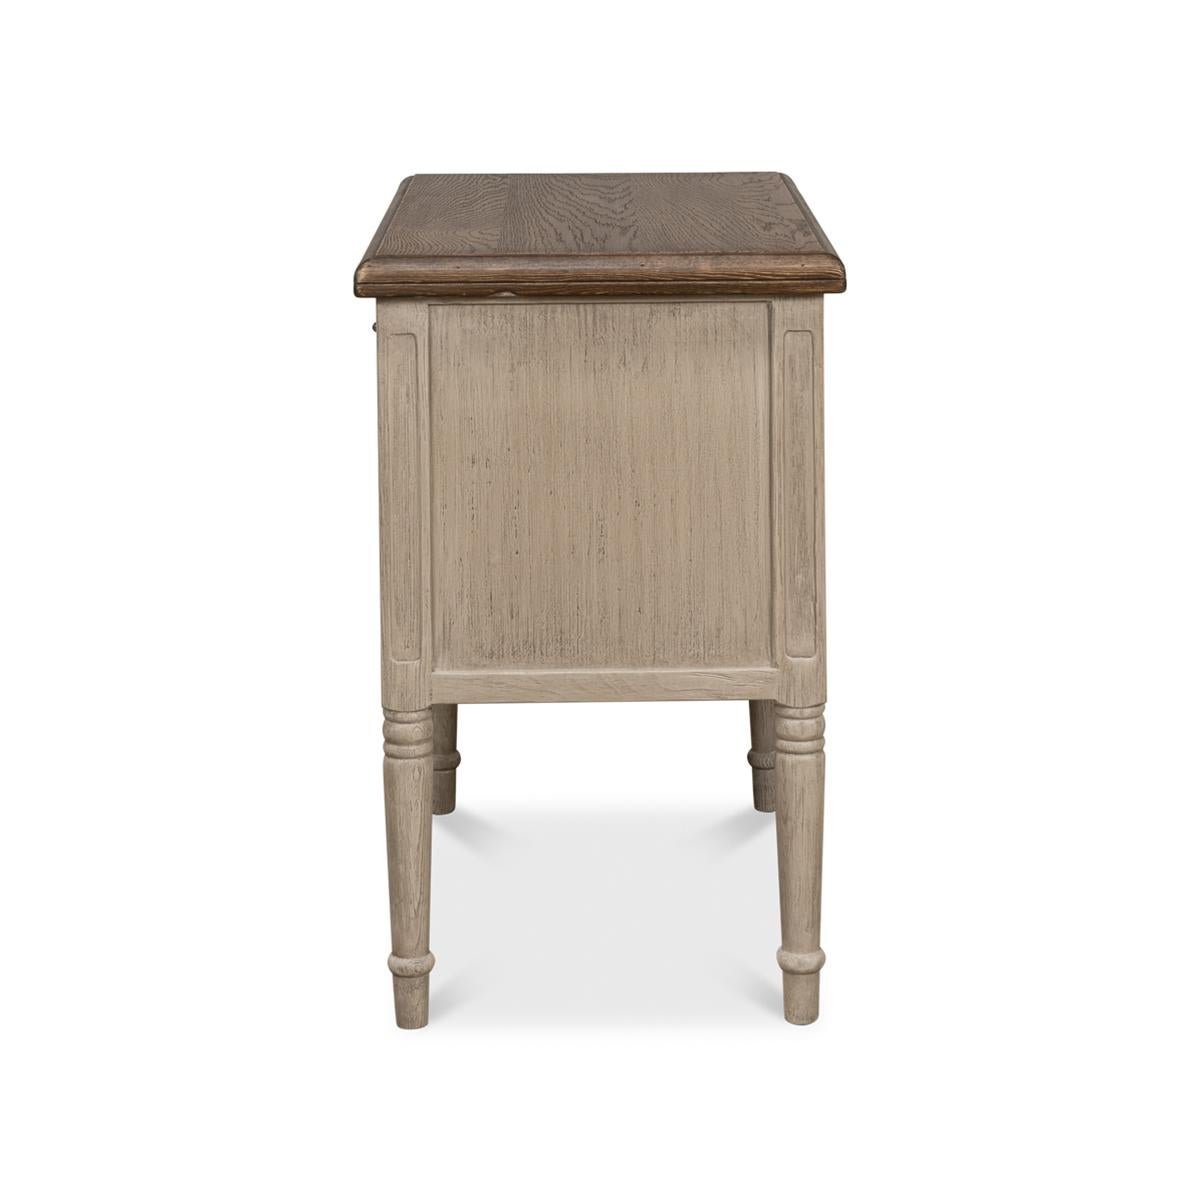 Wood Classic Painted End Table For Sale